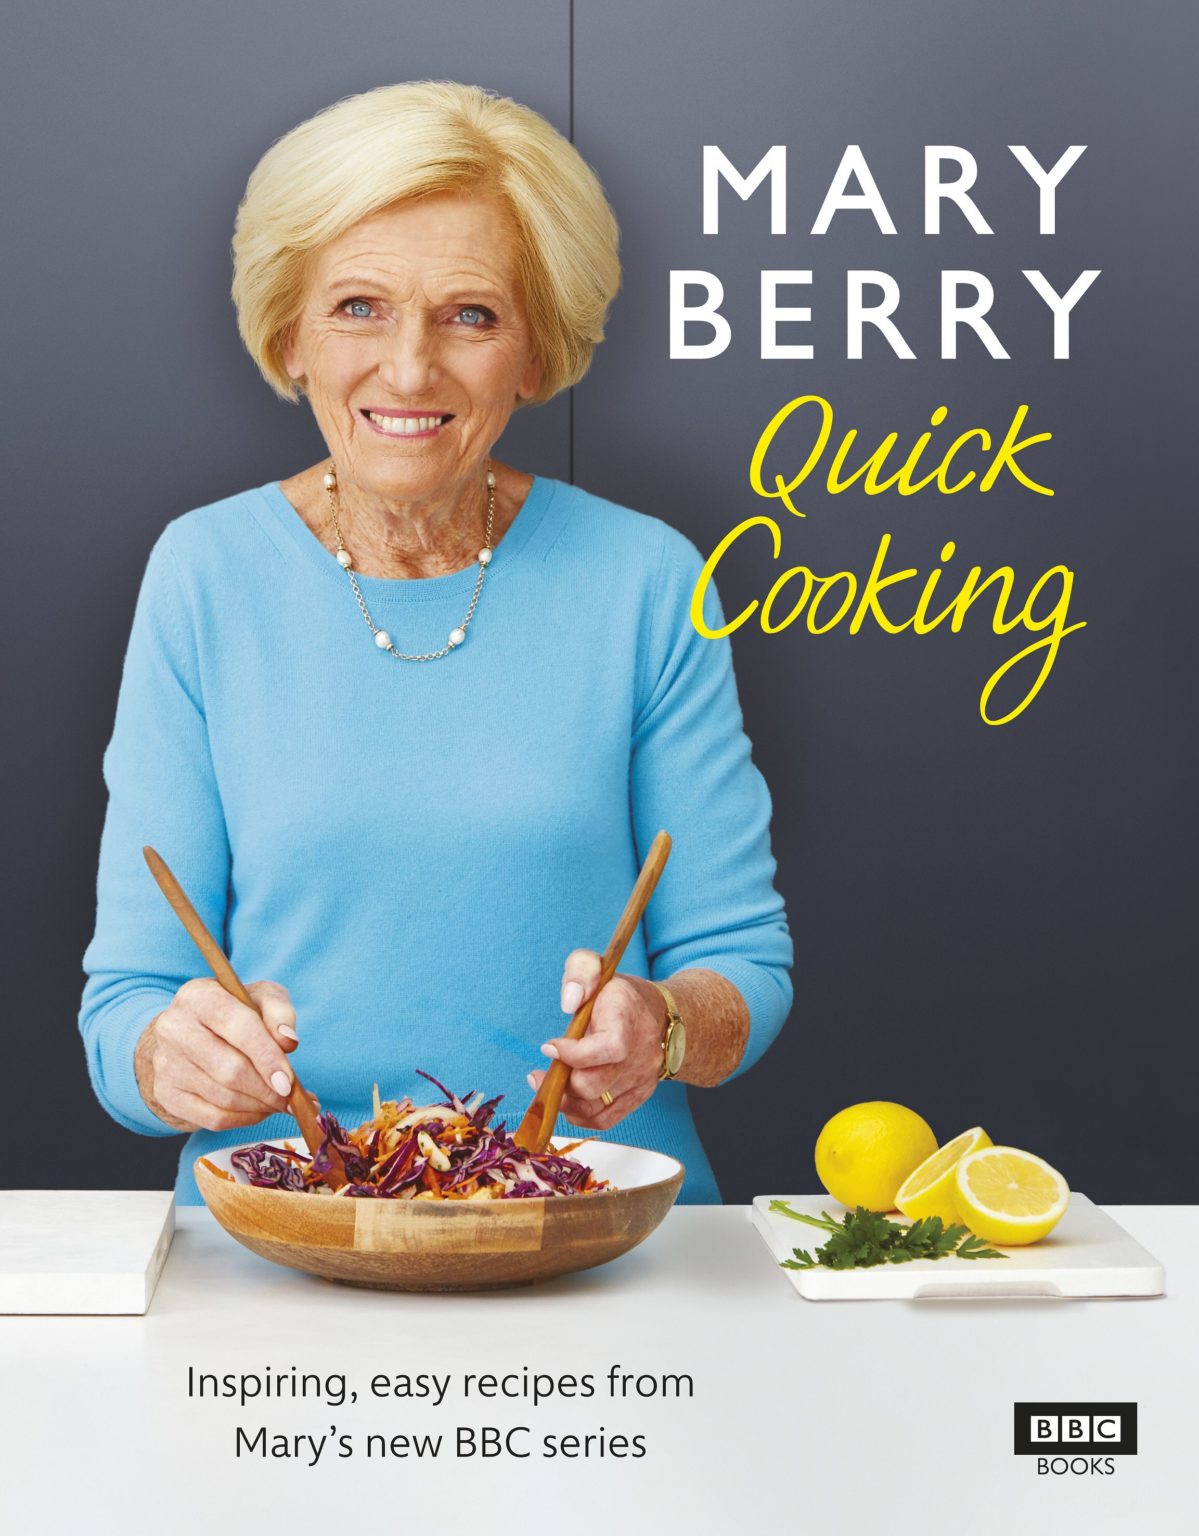 Mary Berry Mother's Day Lunch Menu & Recipes from Quick Cooking